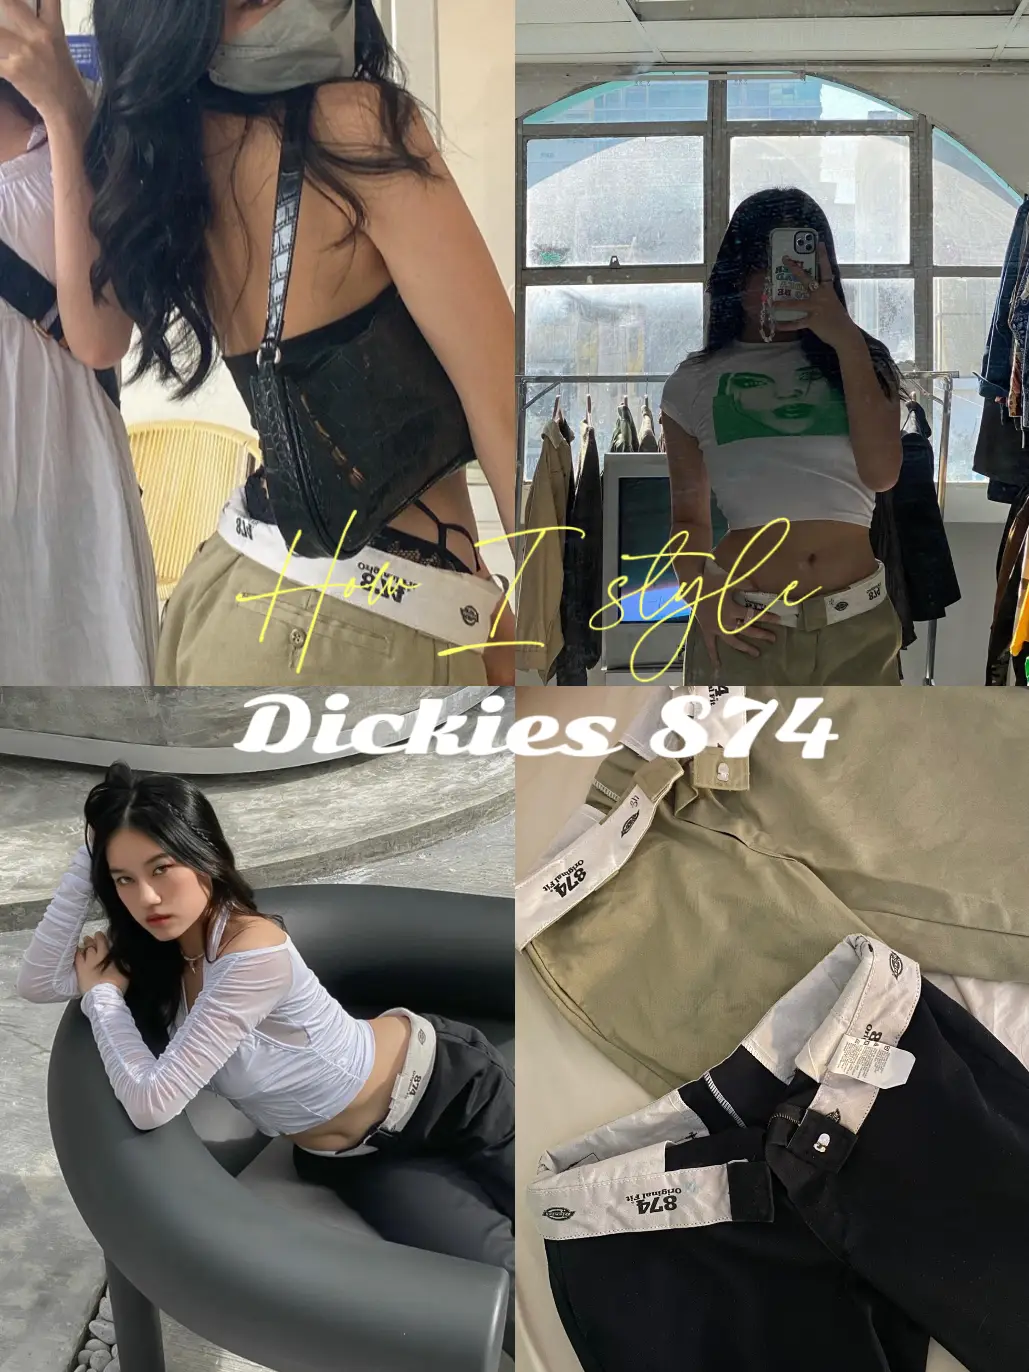 dickies pants. dickies 874. pants outfits. dickies outfits. outfit inspo.